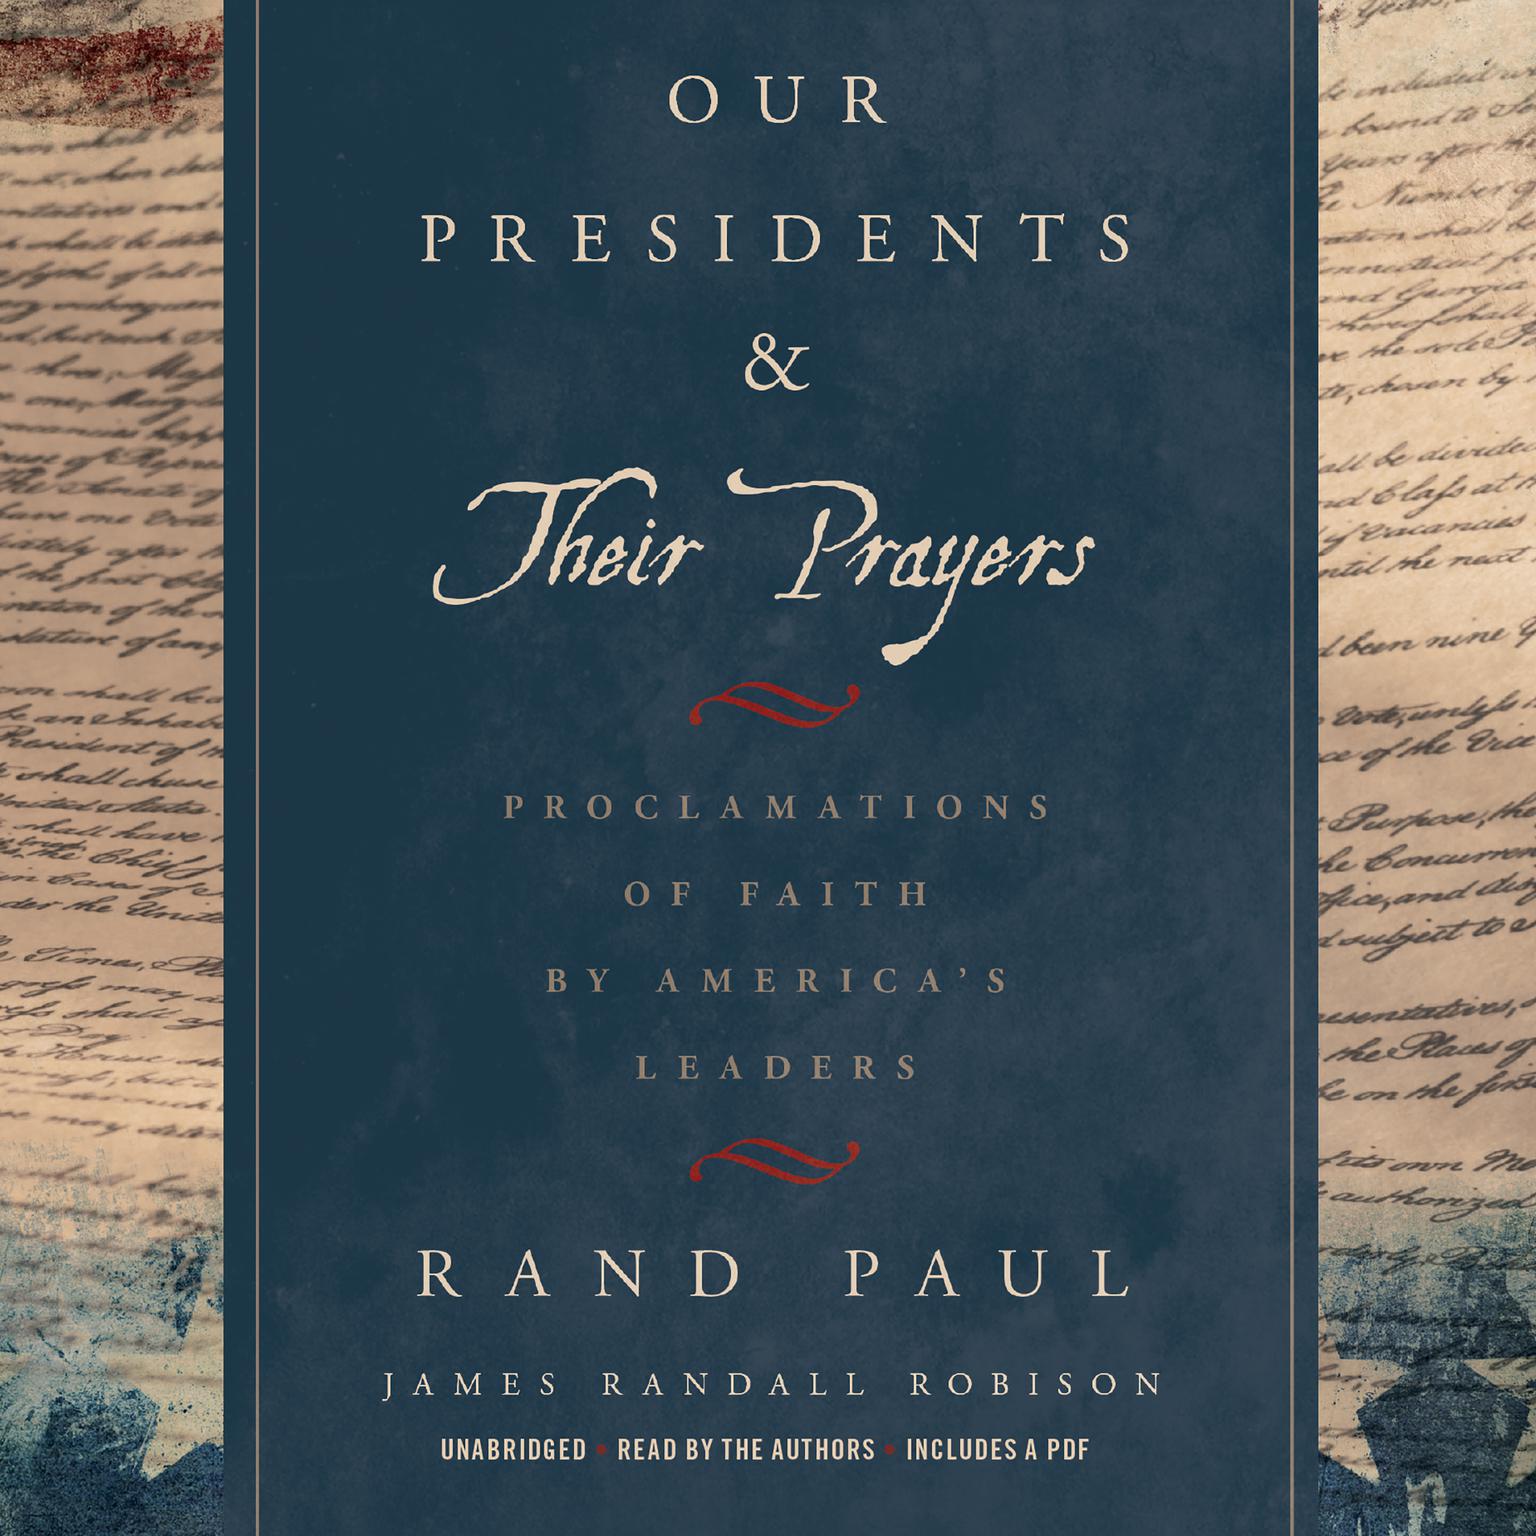 Our Presidents & Their Prayers: Proclamations of Faith by Americas Leaders Audiobook, by Rand Paul